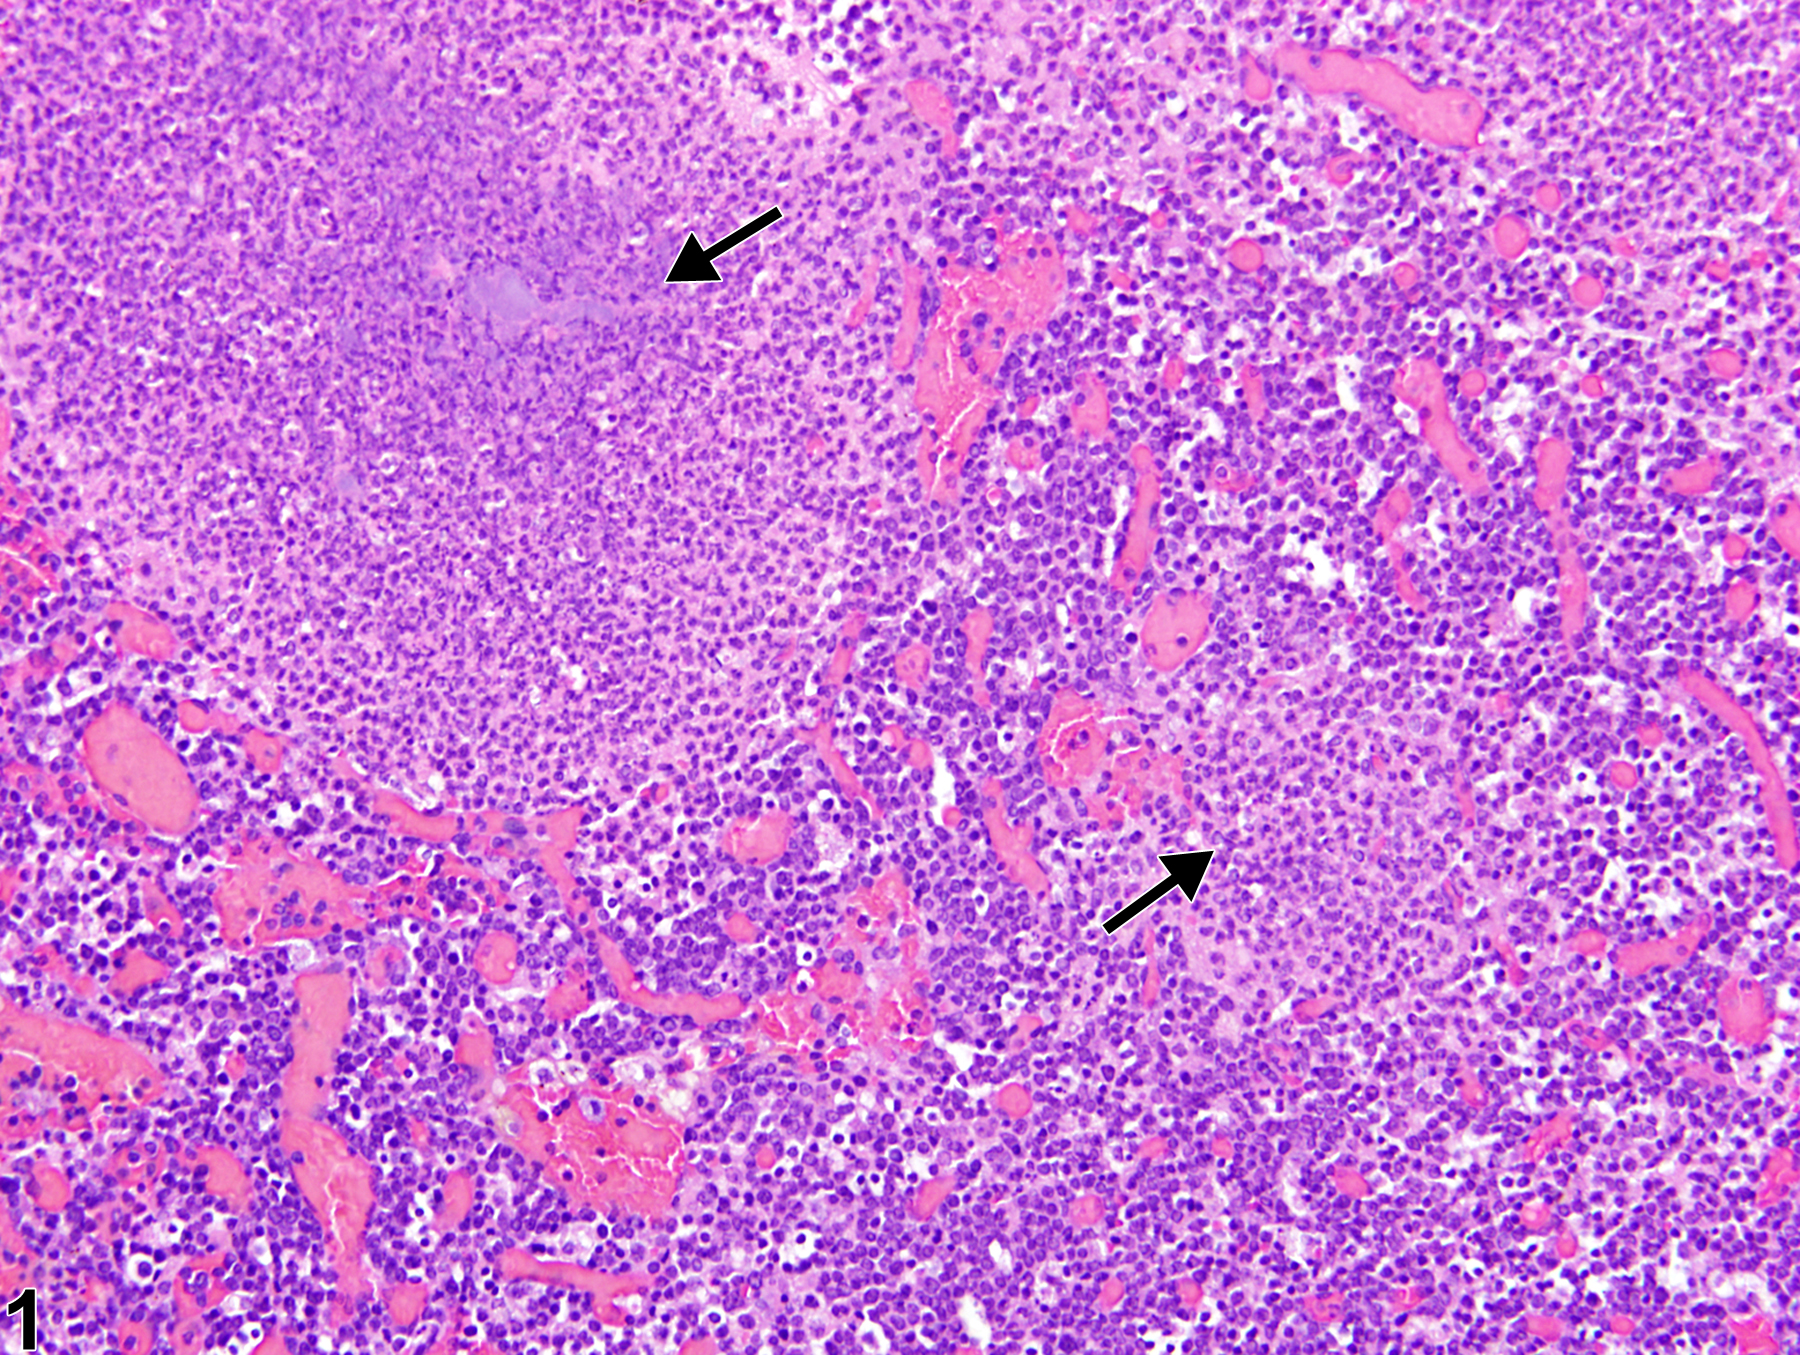 Image of inflammation in the thymus from a female B6C3F1/N mouse in a chronic study